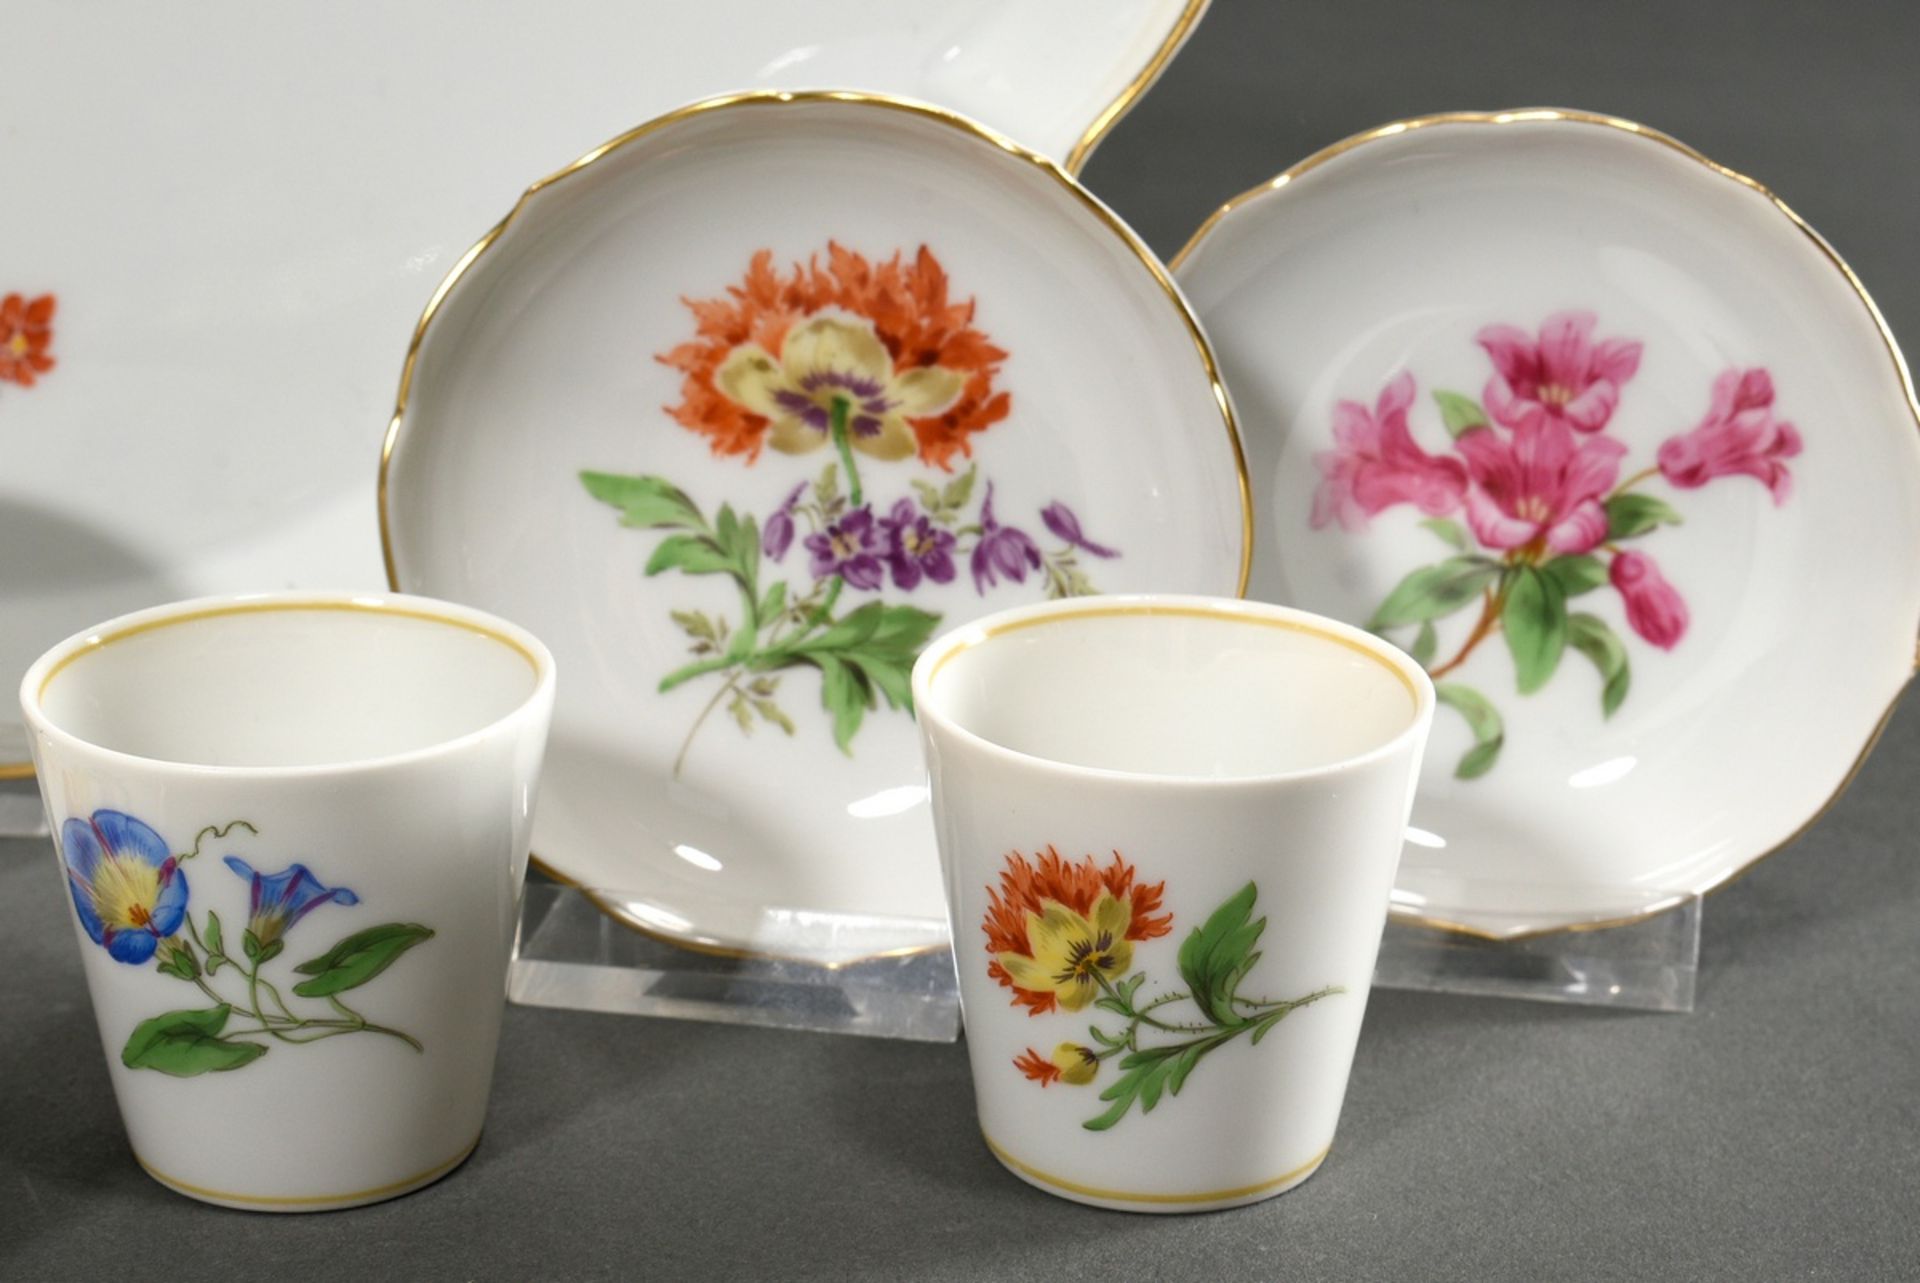 11 Various pieces Meissen "German Flower" with gold staffage and yellow rim (war painting), 1924-19 - Image 3 of 6